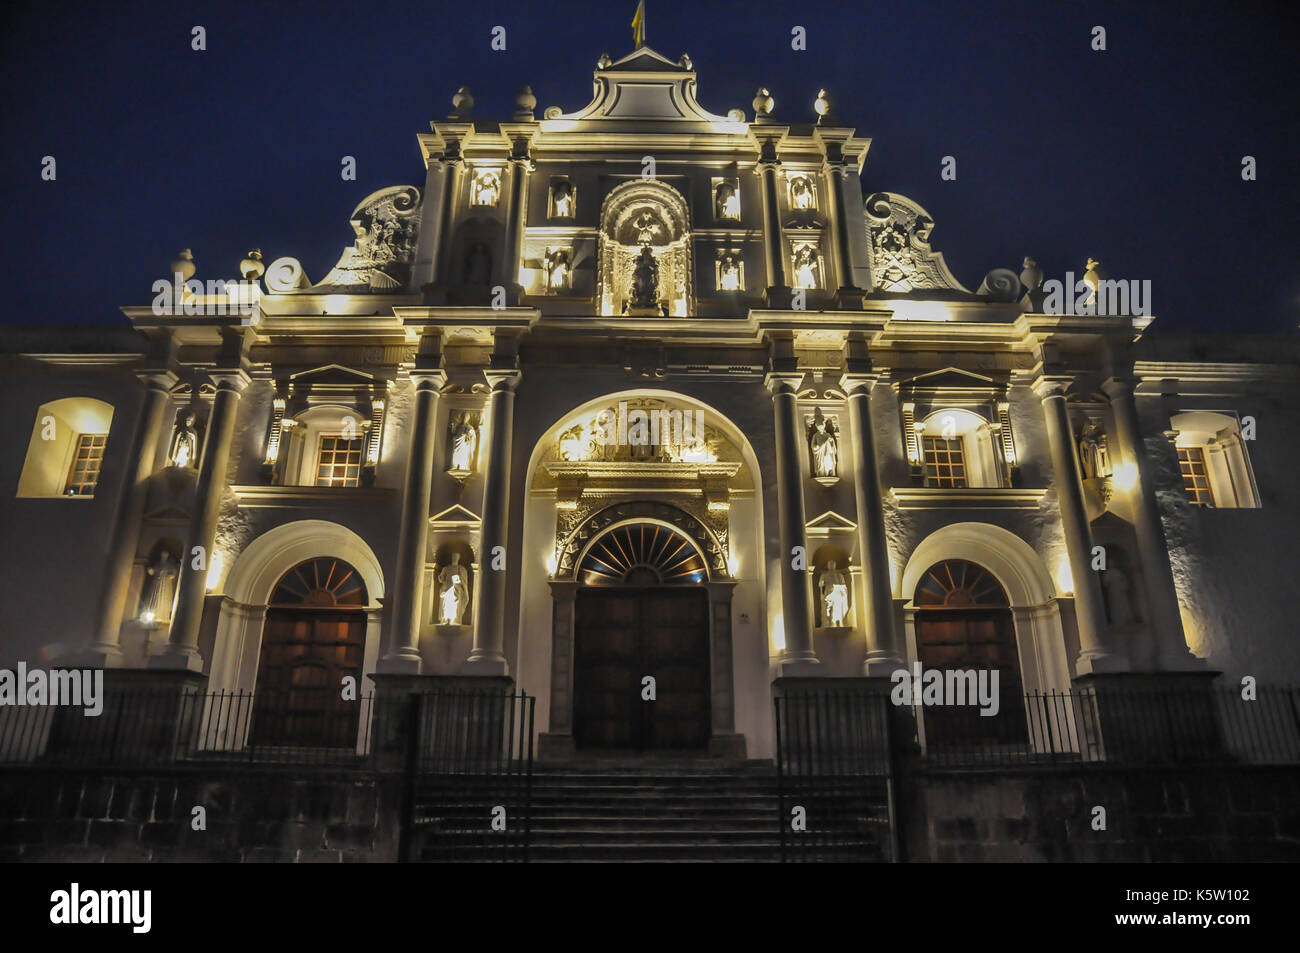 A baroque-style church facade illuminated at night, displaying its intricate architectural details and warm lighting Antigua guatemala Stock Photo